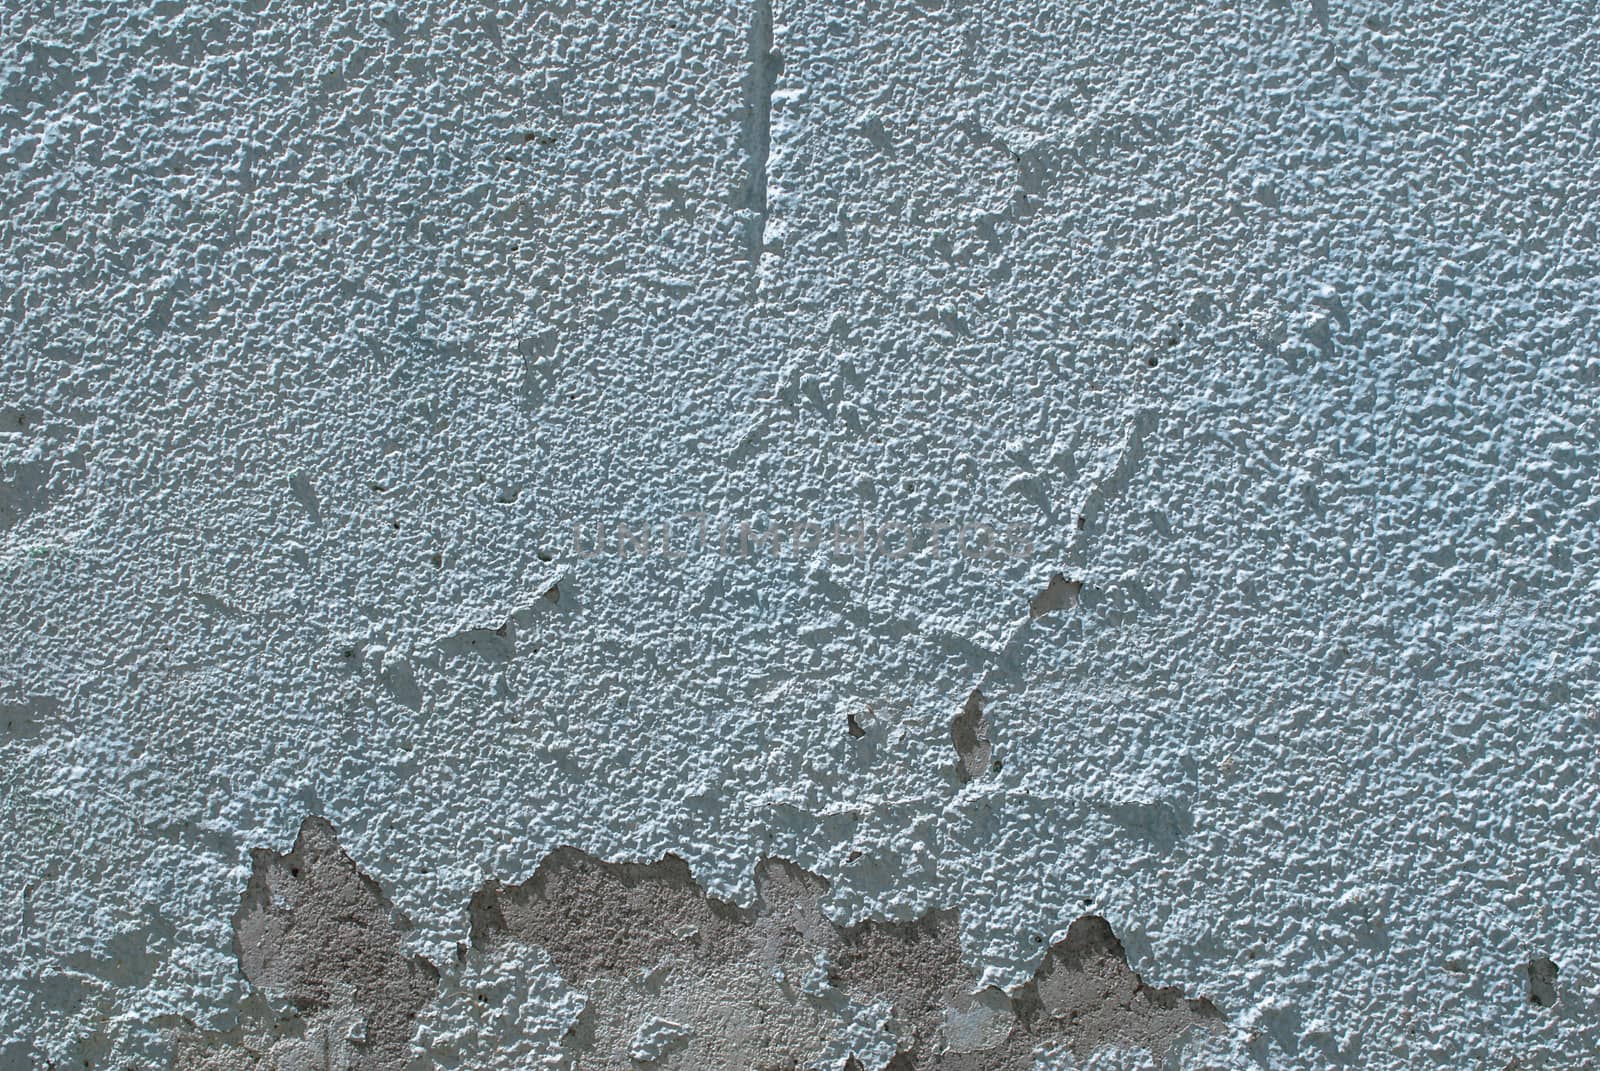 fragment of a concrete wall, which has undergone deformation due to prolonged exposure to various climatic conditions